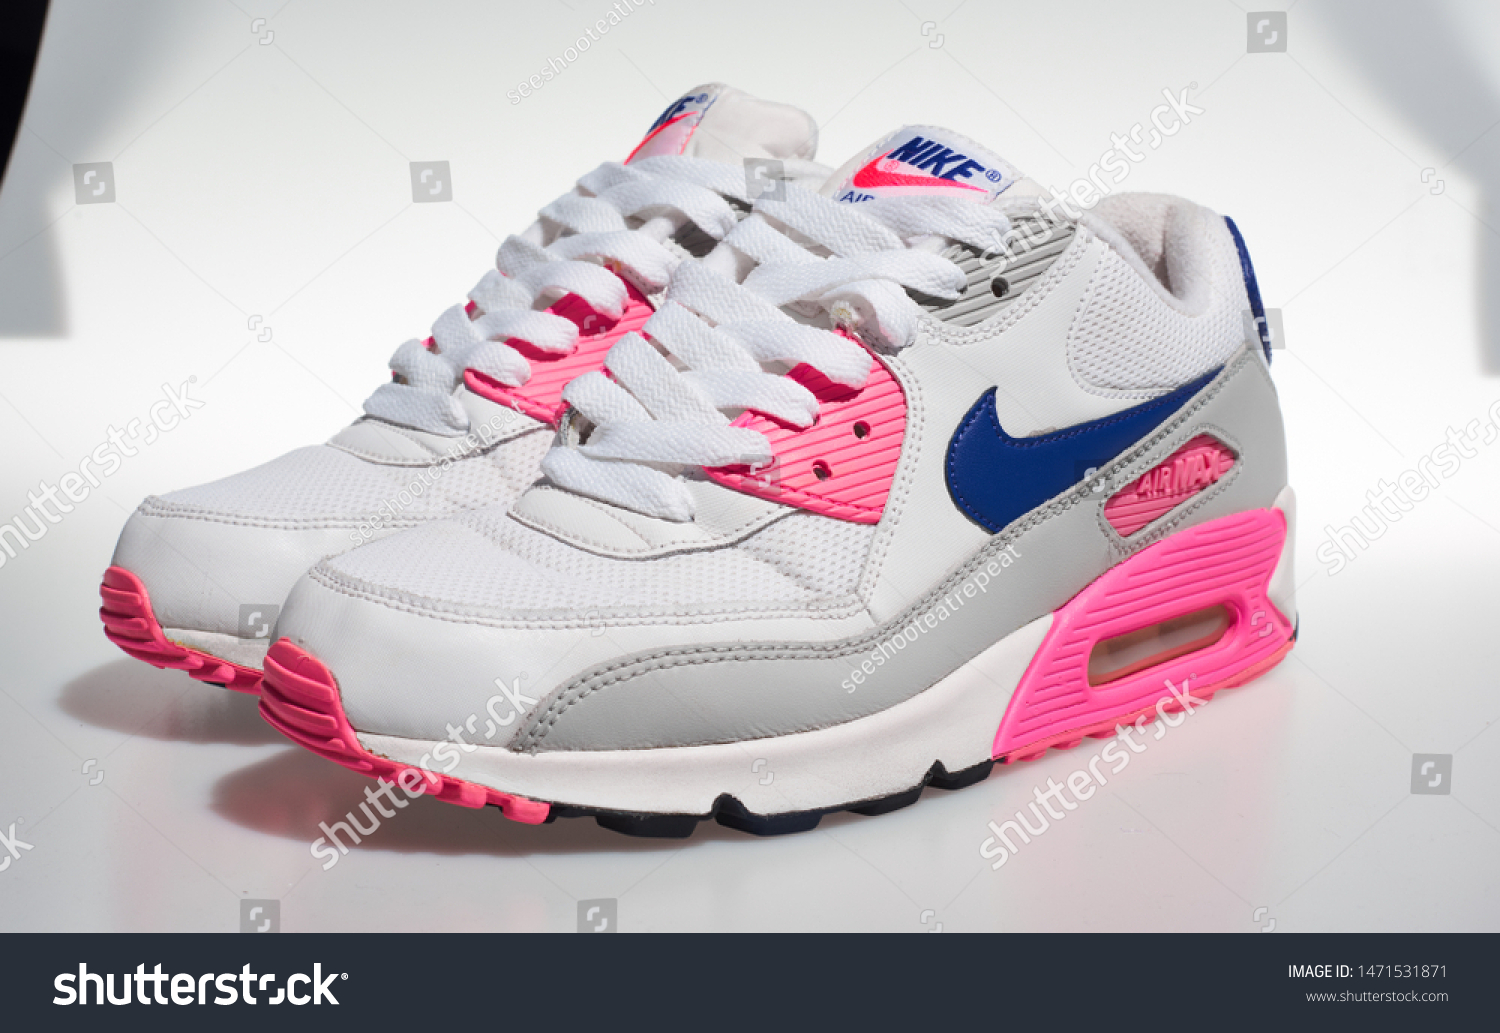 pink and purple air max